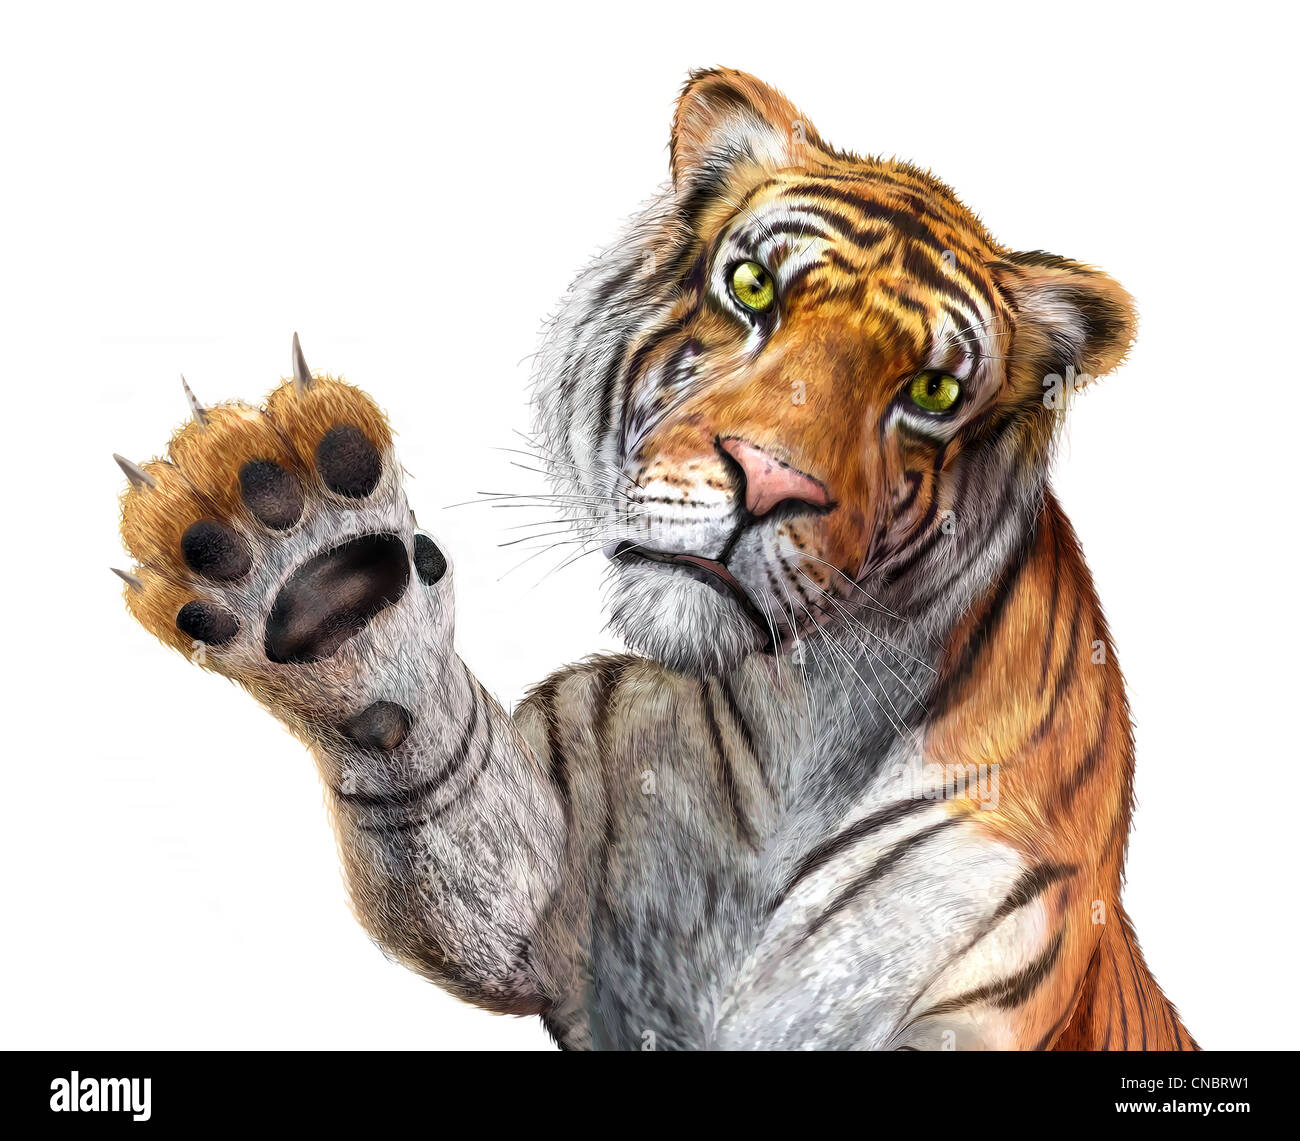 Tiger close up, facing the viewer, with the right hand up and claws. Stock Photo